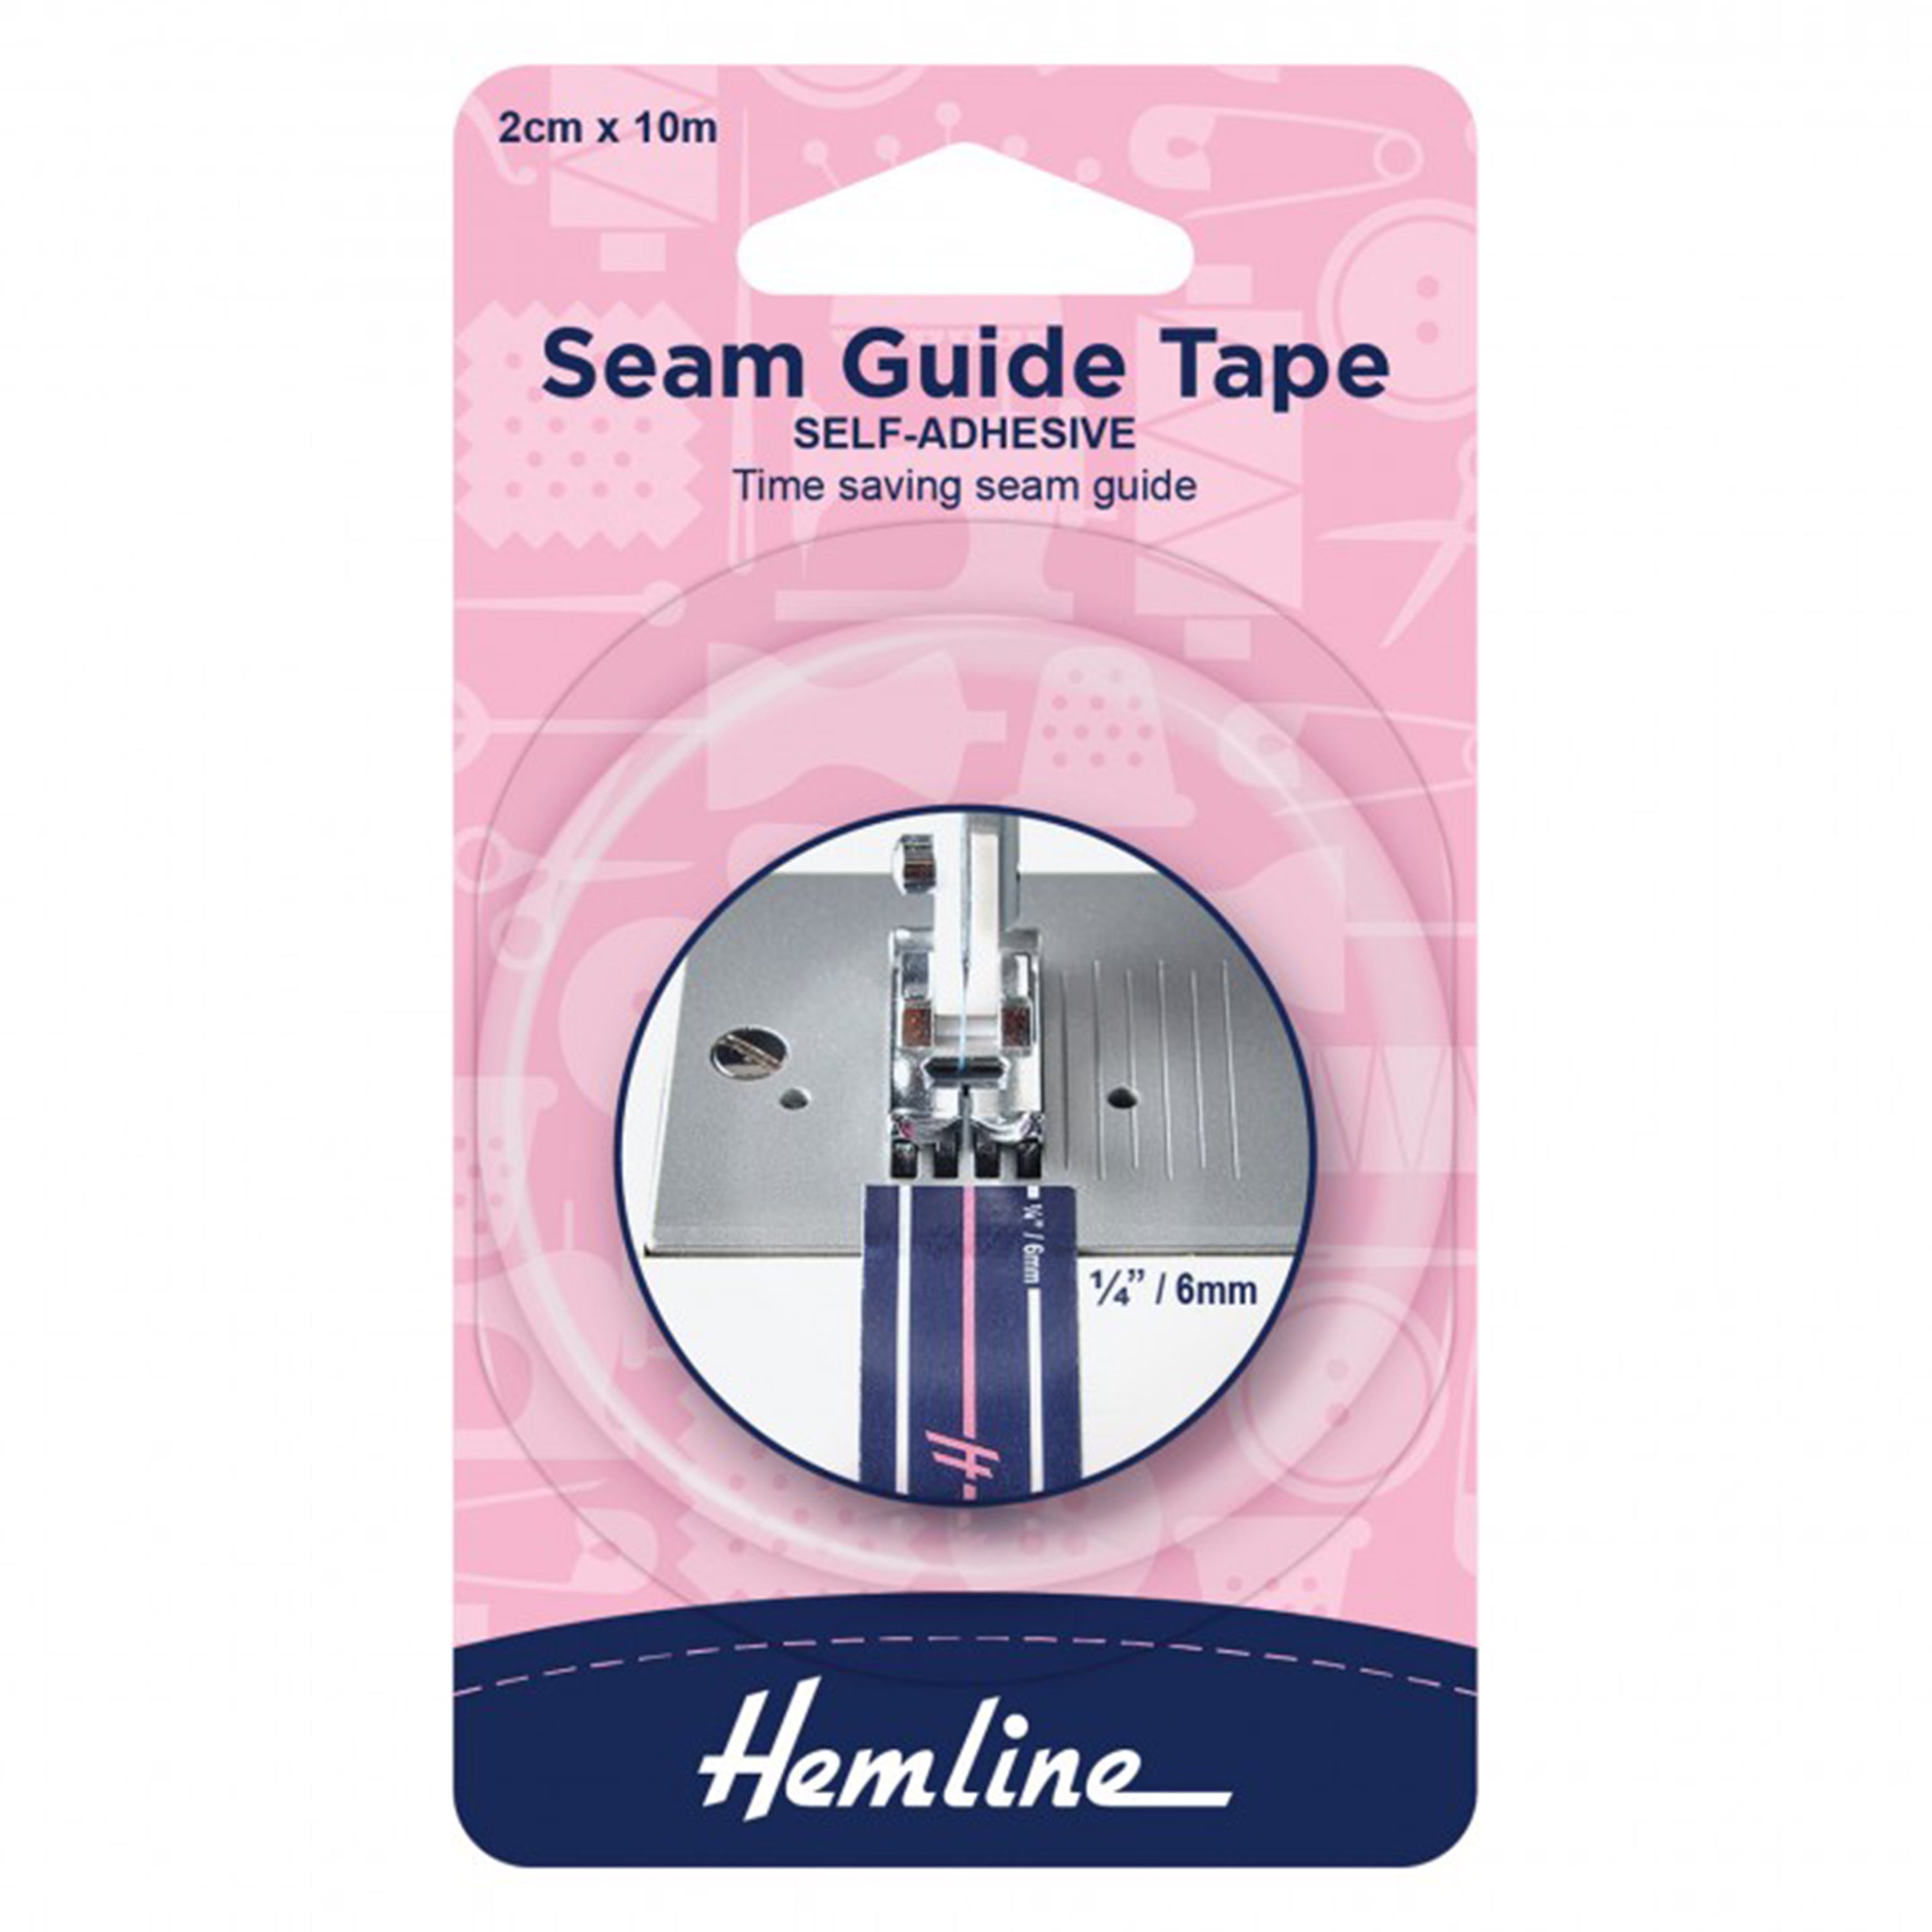 Seam Guide Tape by Hemline – Lou Orth Designs - Modern quilt patterns